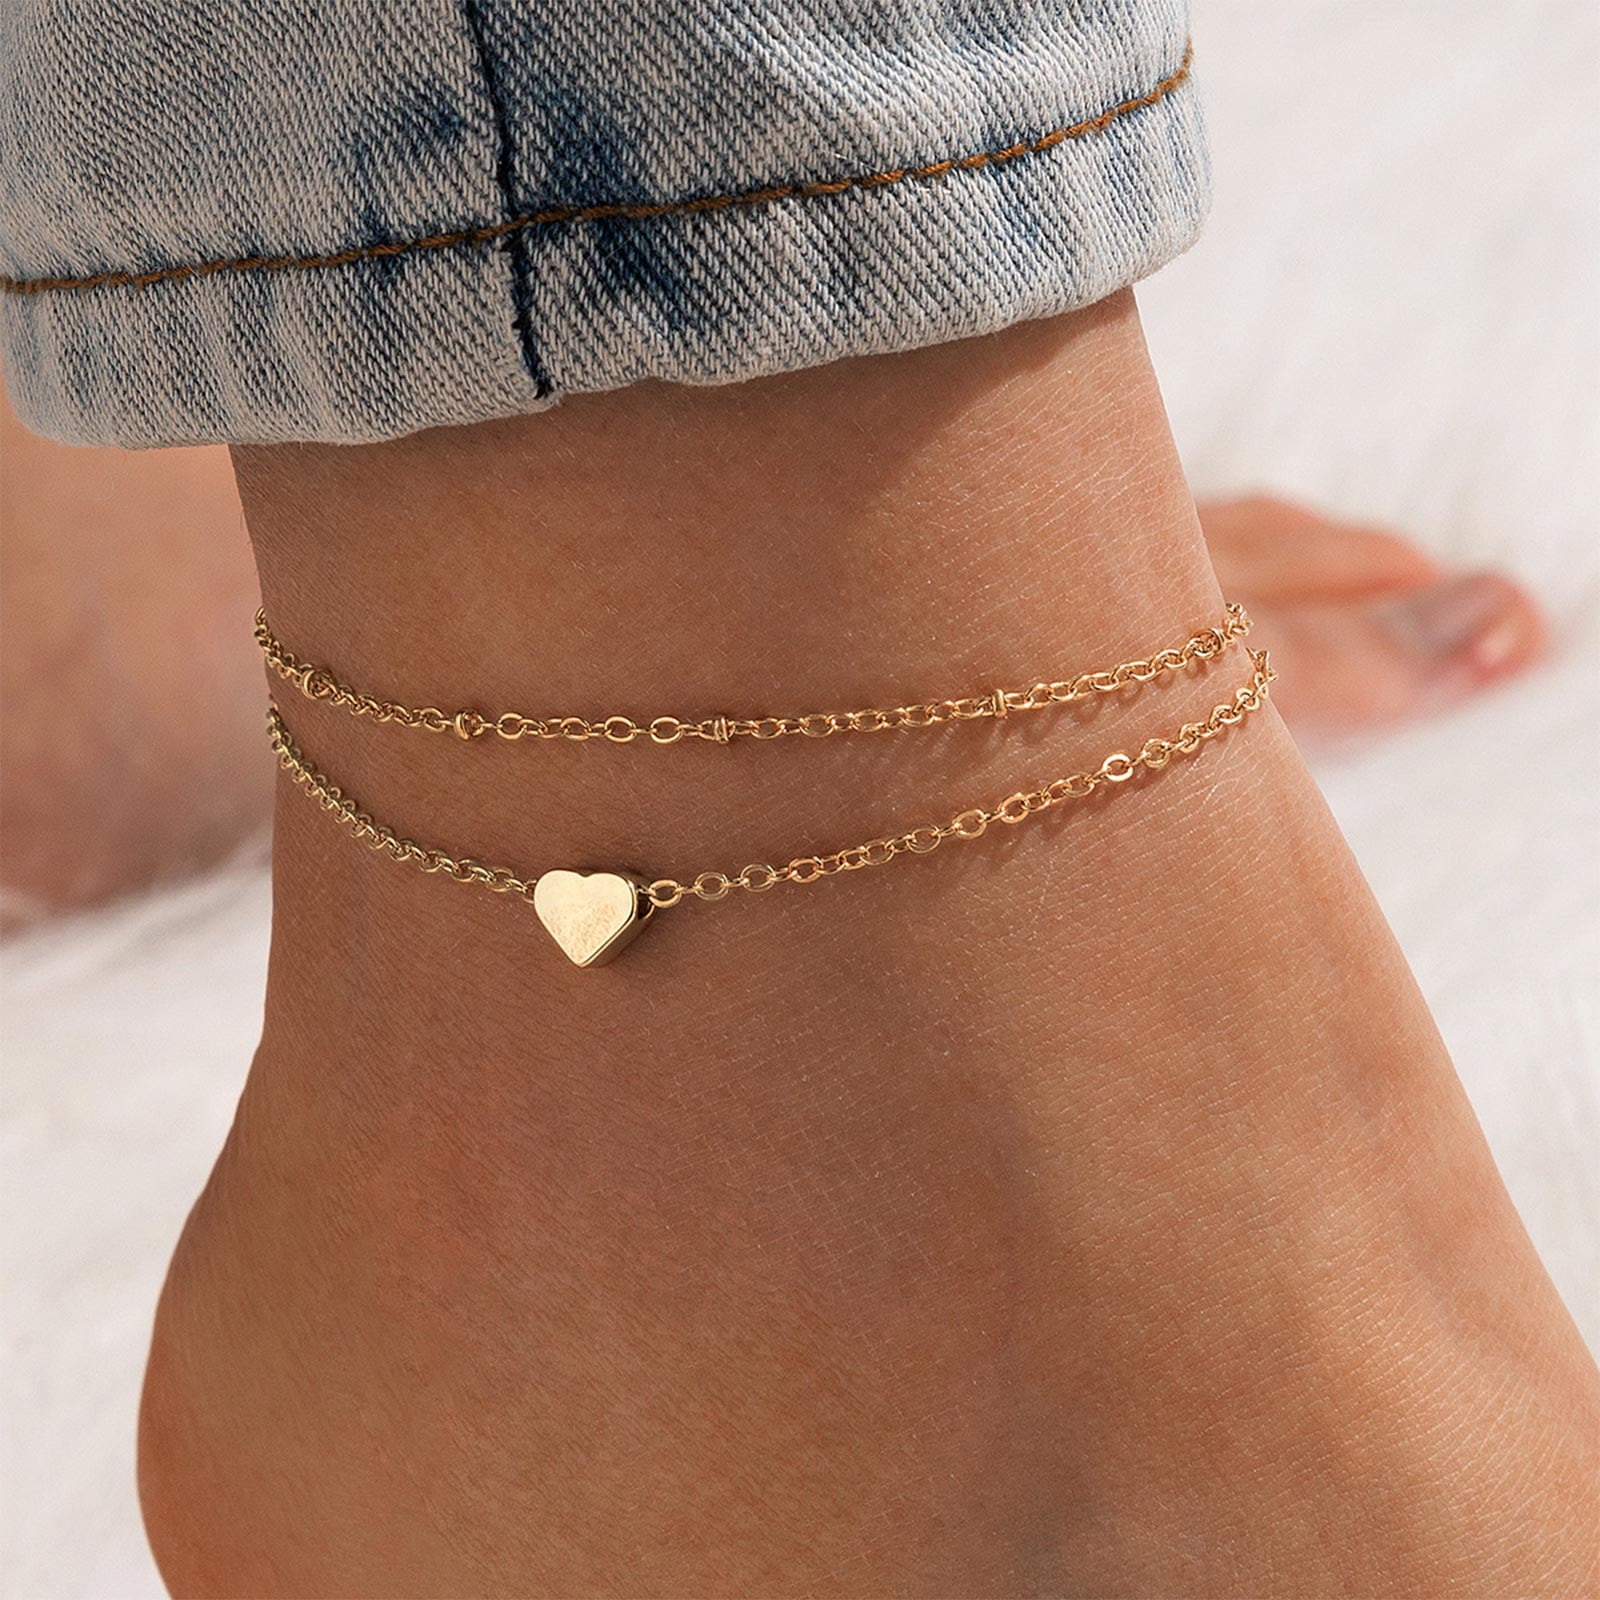 11 Pieces Anklets for Women Cute Charms Butterfly Ankle Bracelets  Rhinestone Anklets Boho Beach Layered Chain Anklets for Girls Foot Jewelry   Amazonin Jewellery